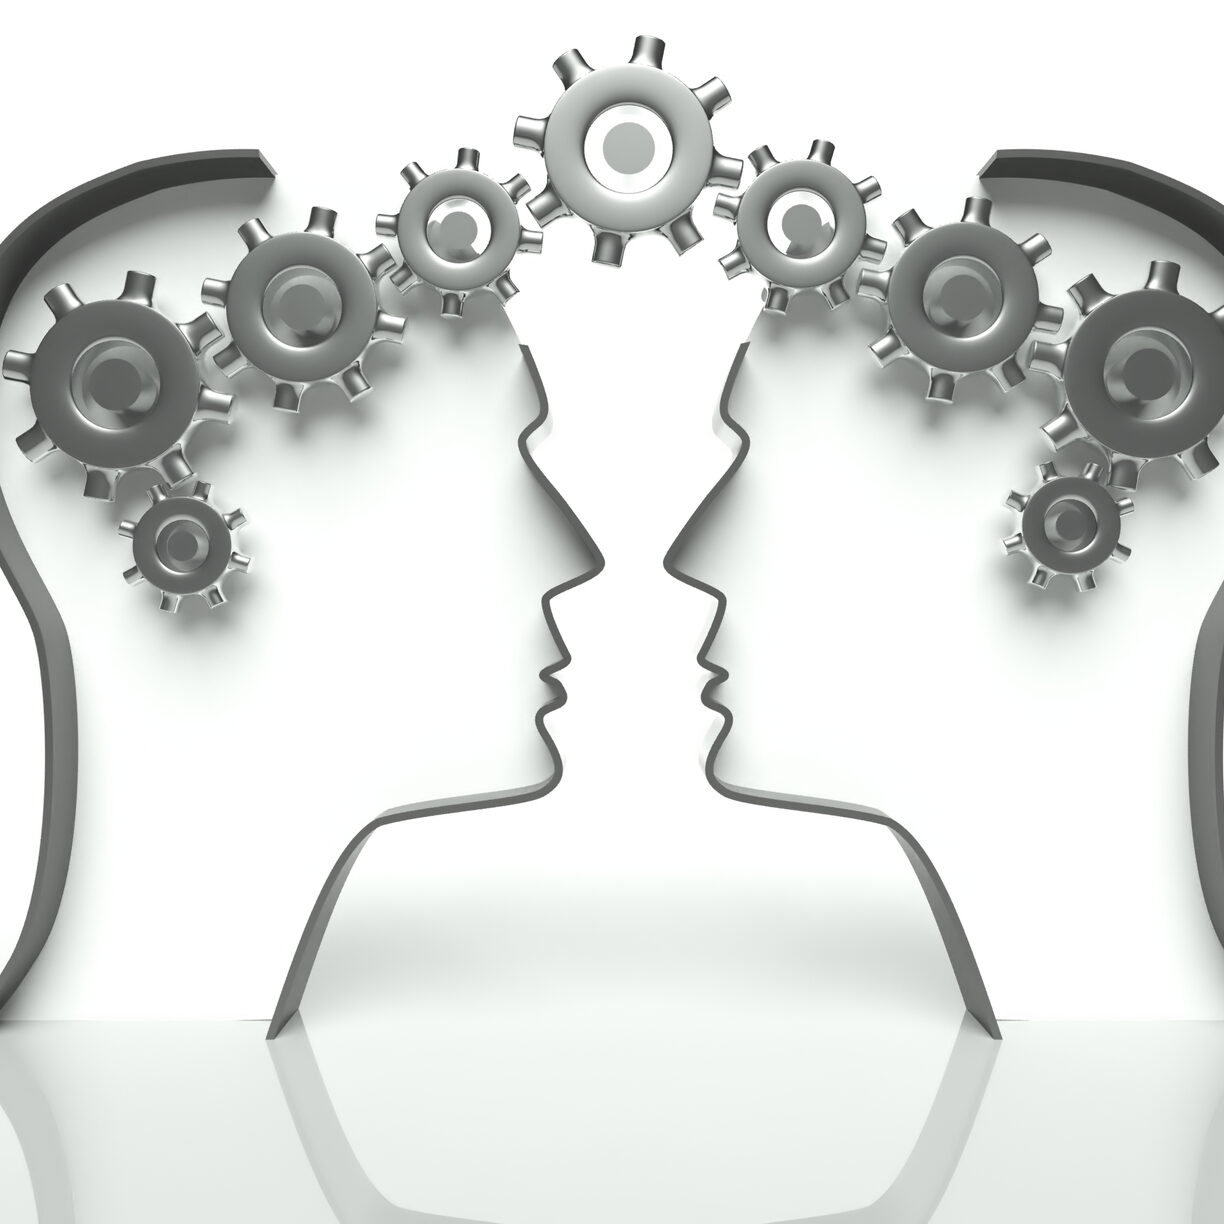 Brains made of gears in heads, concept of thinking and cooperation with communication